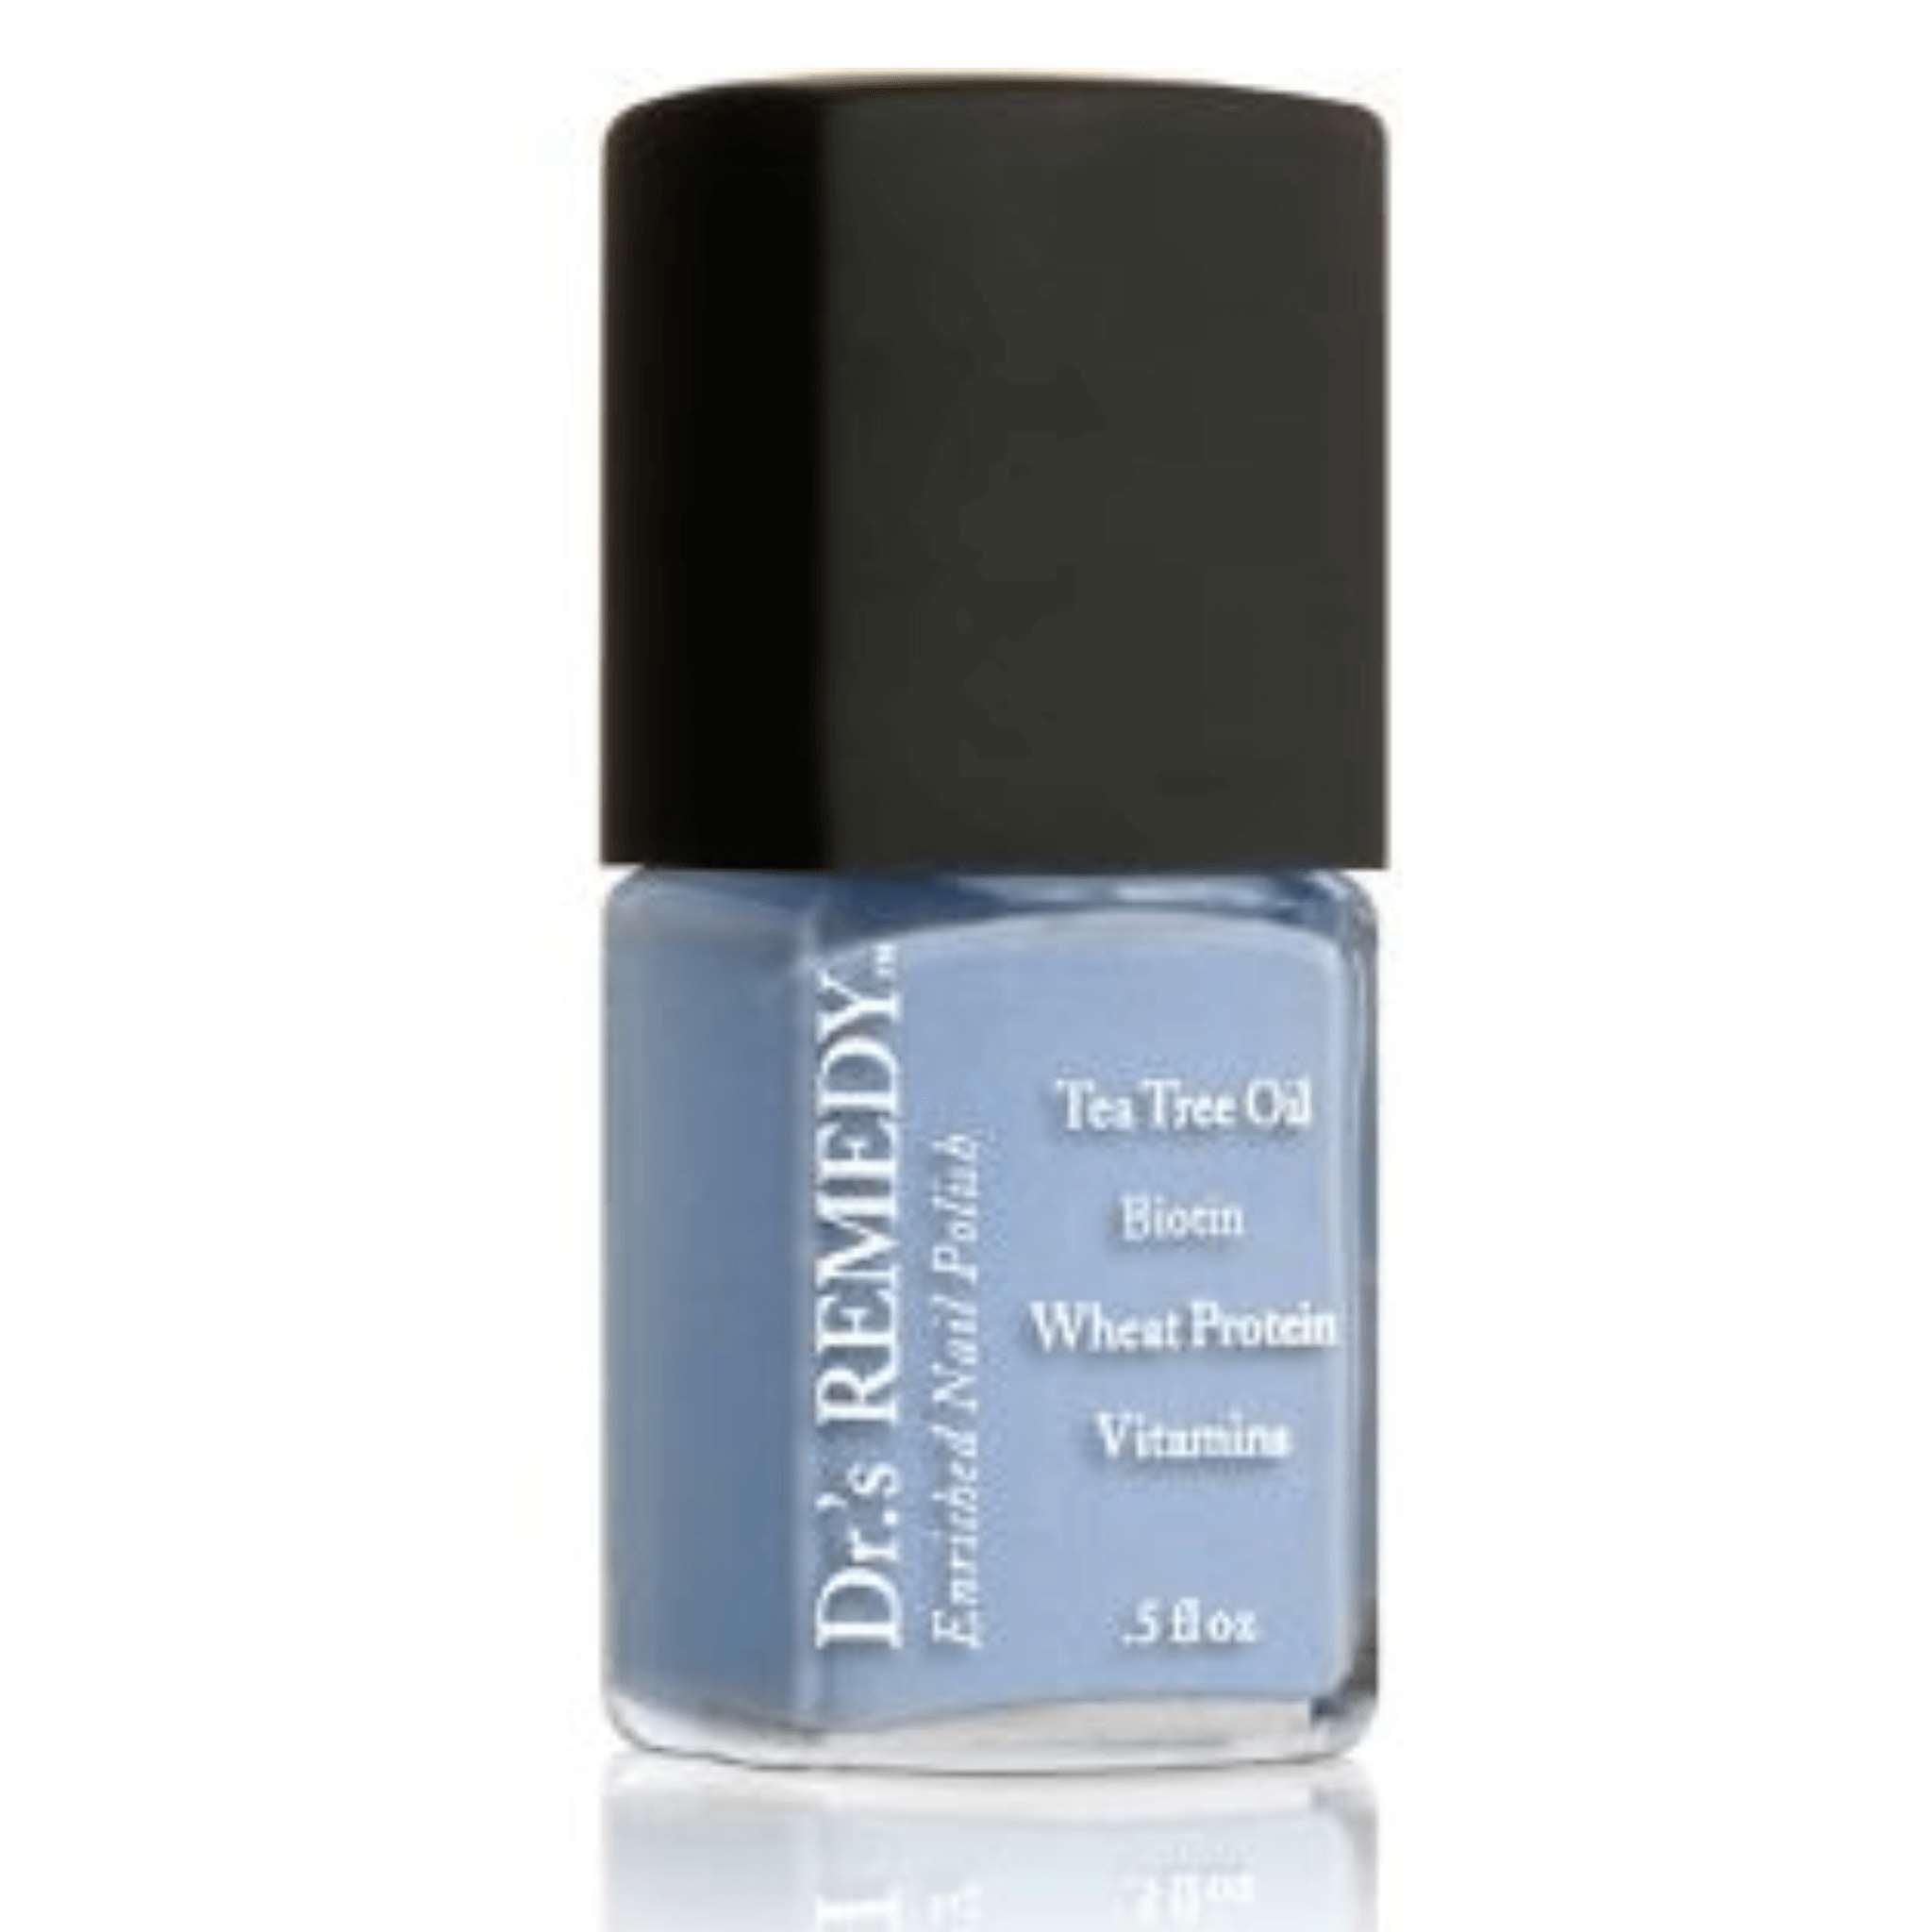 Dr.'s REMEDY Enriched Nail Polish / PERCEPTIVE Periwinkle (shimmer) 15ml